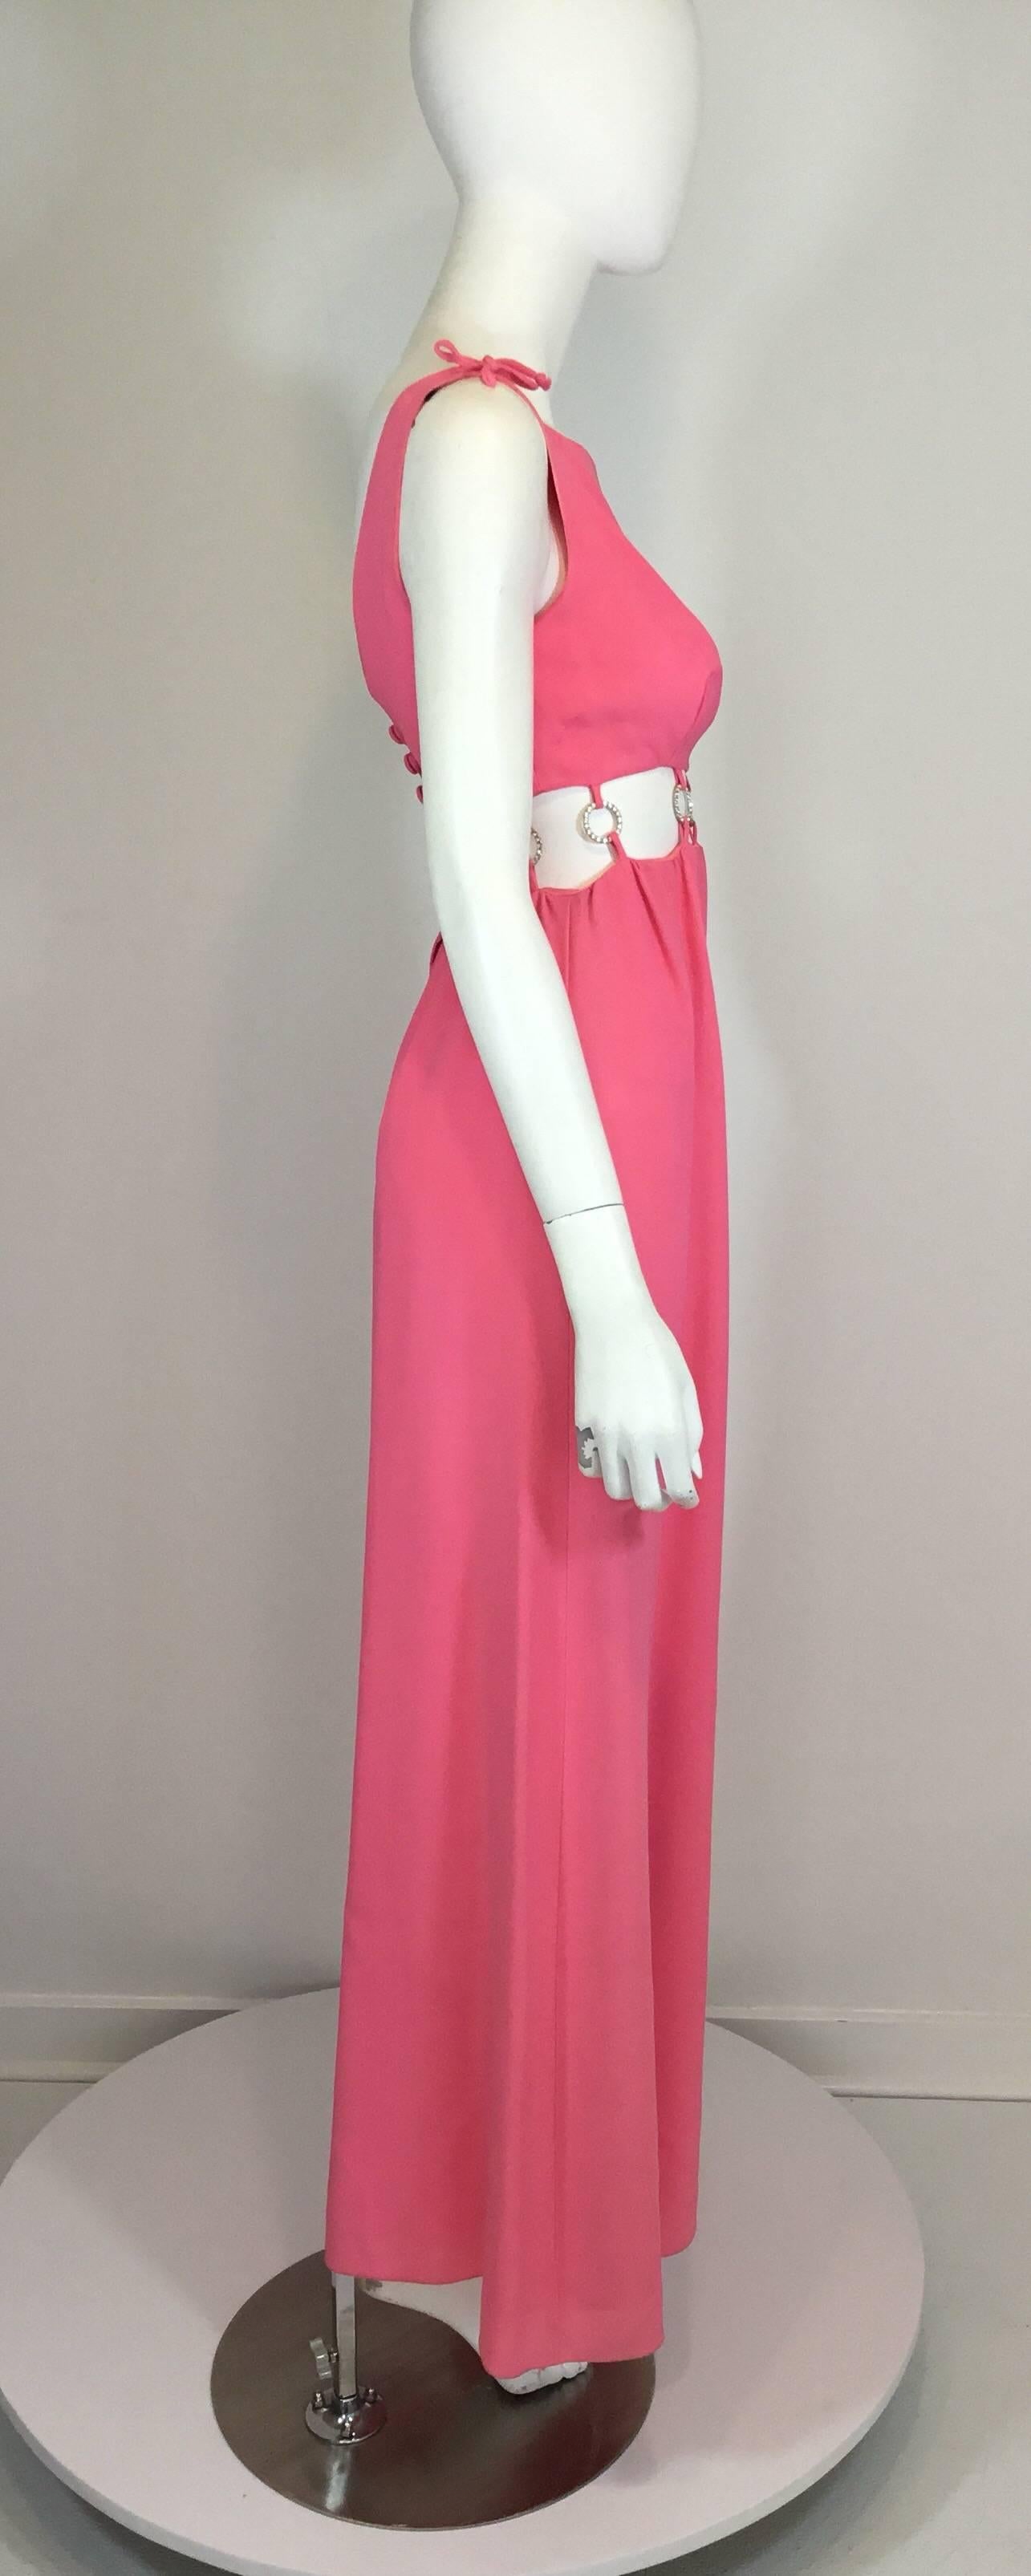 Vintage 1960's maxi dress in a pink crepe-like fabric with an exposed midriff that features decorative rhinestone O-rings connecting the top and skirt. Dress is fully lined with a low backline and a zipper fastening. Excellent condition.